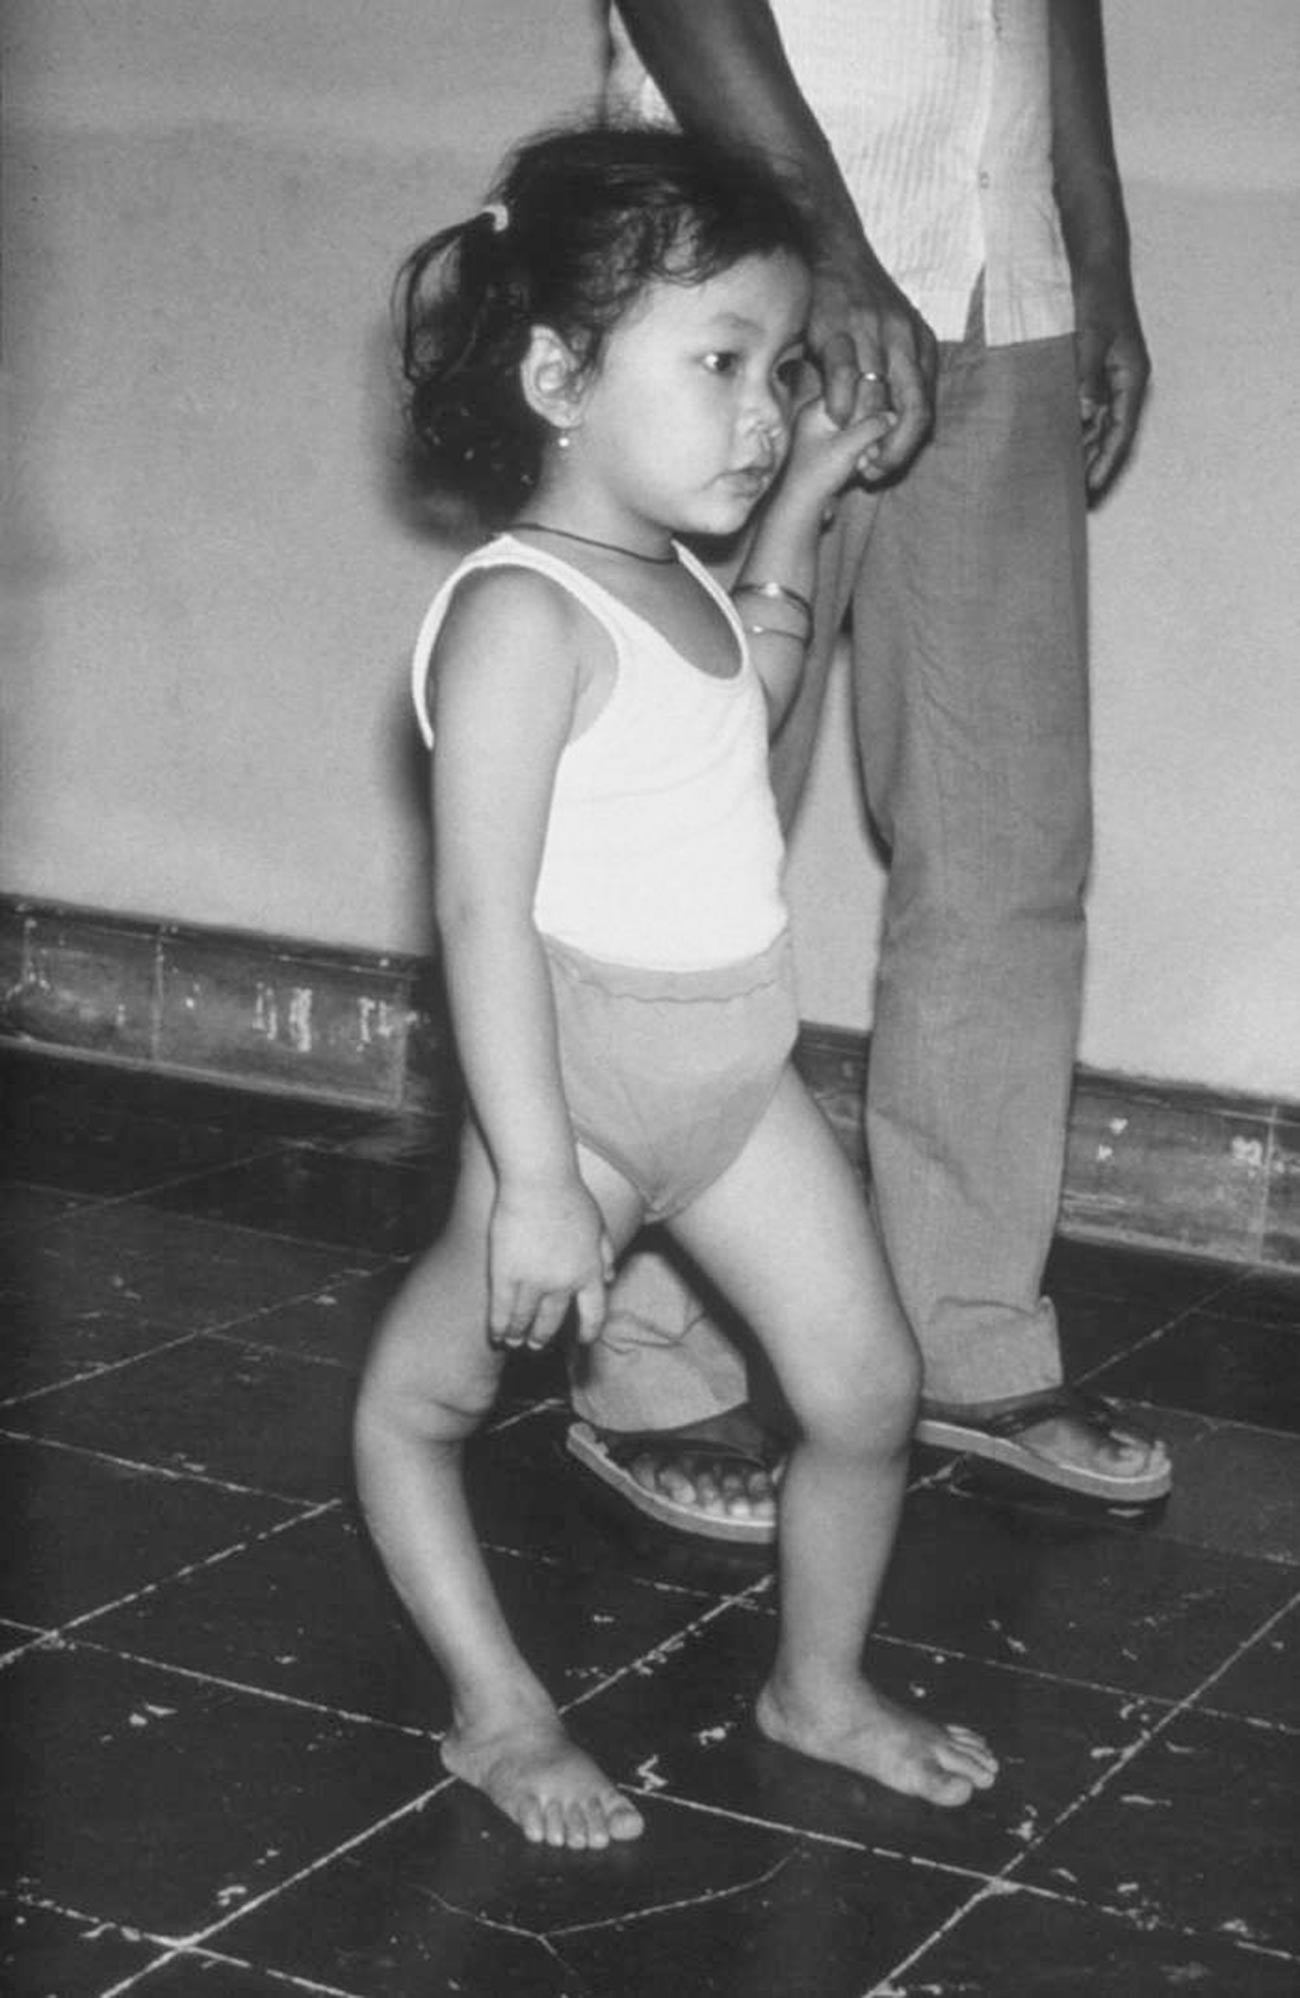 A girl with a deformity of her right leg due to polio